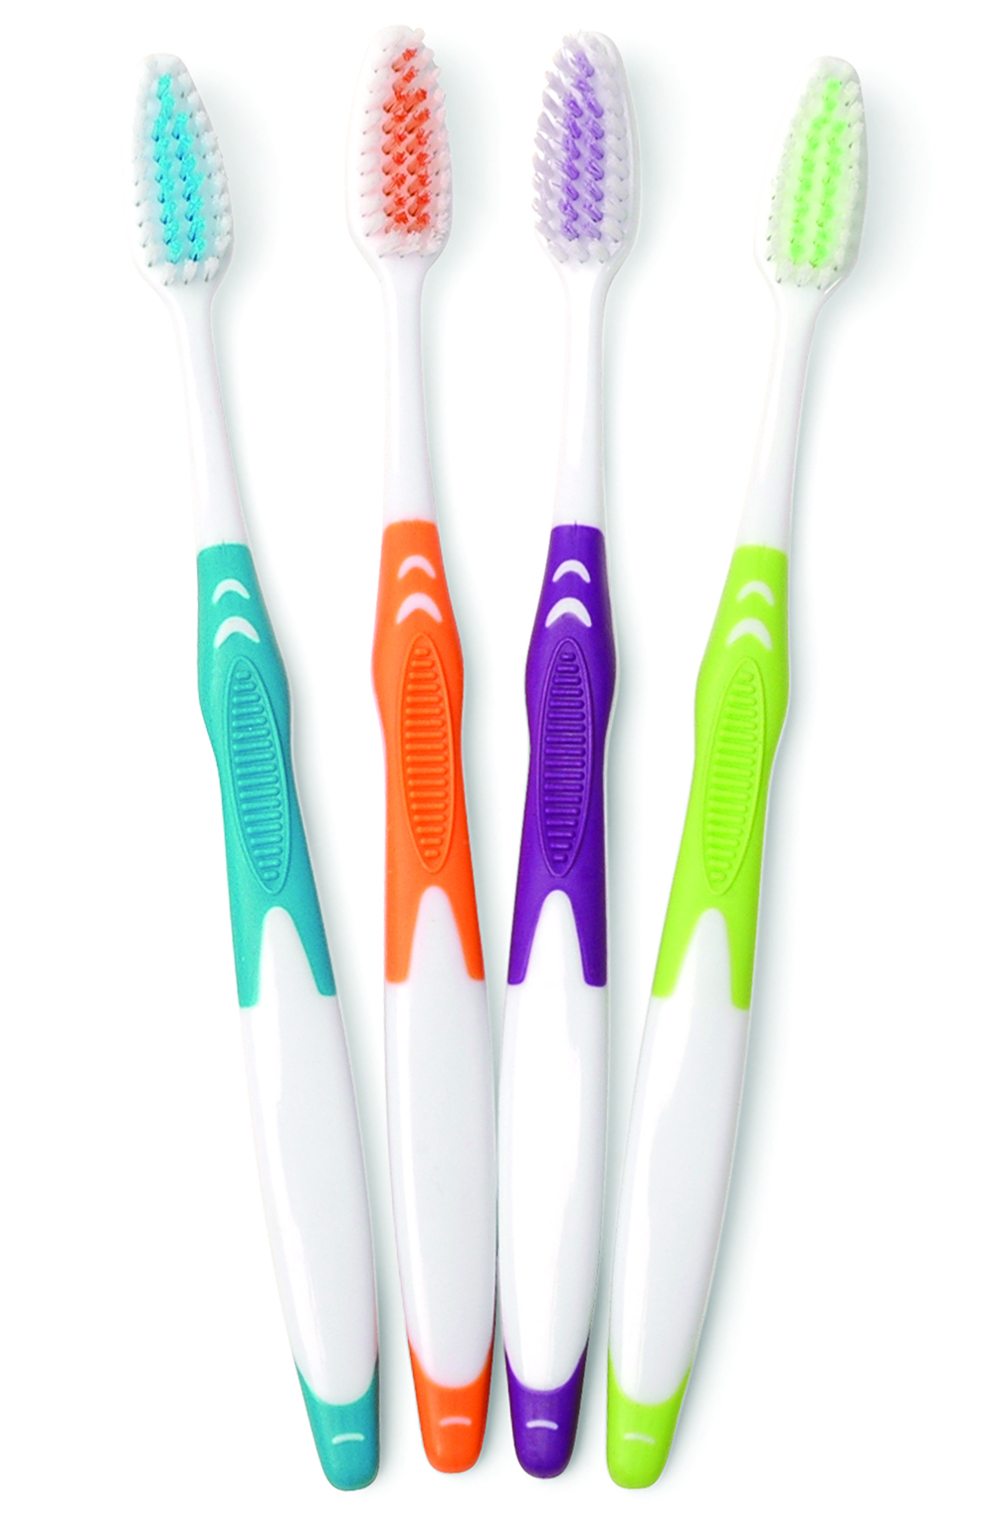 bulk toothbrushes and toothpaste